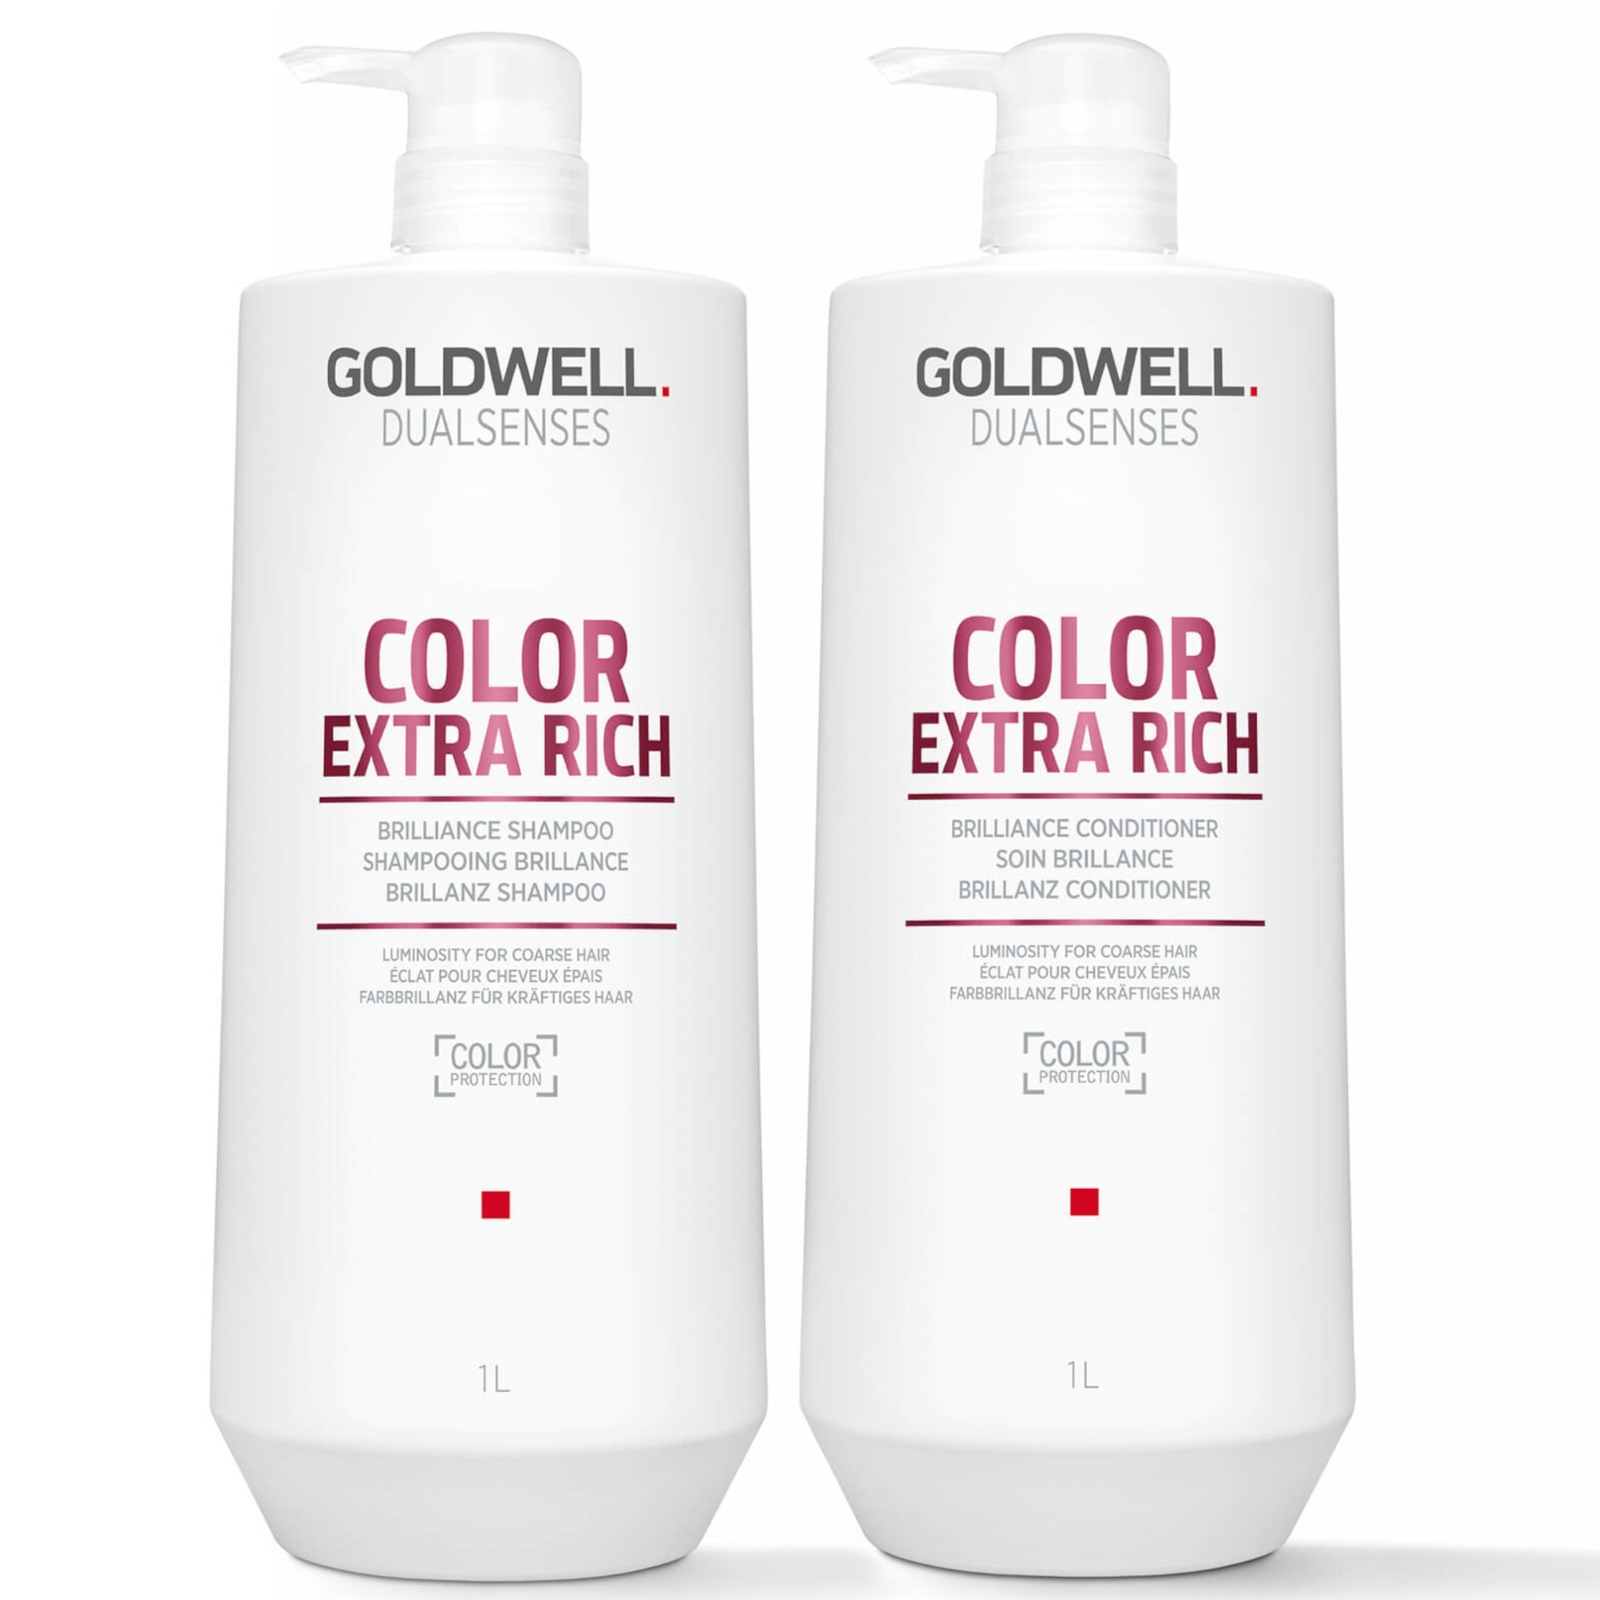 Goldwell Dualsenses Color Brilliance Extra Rich Shampoo and Conditioner 1L Duo